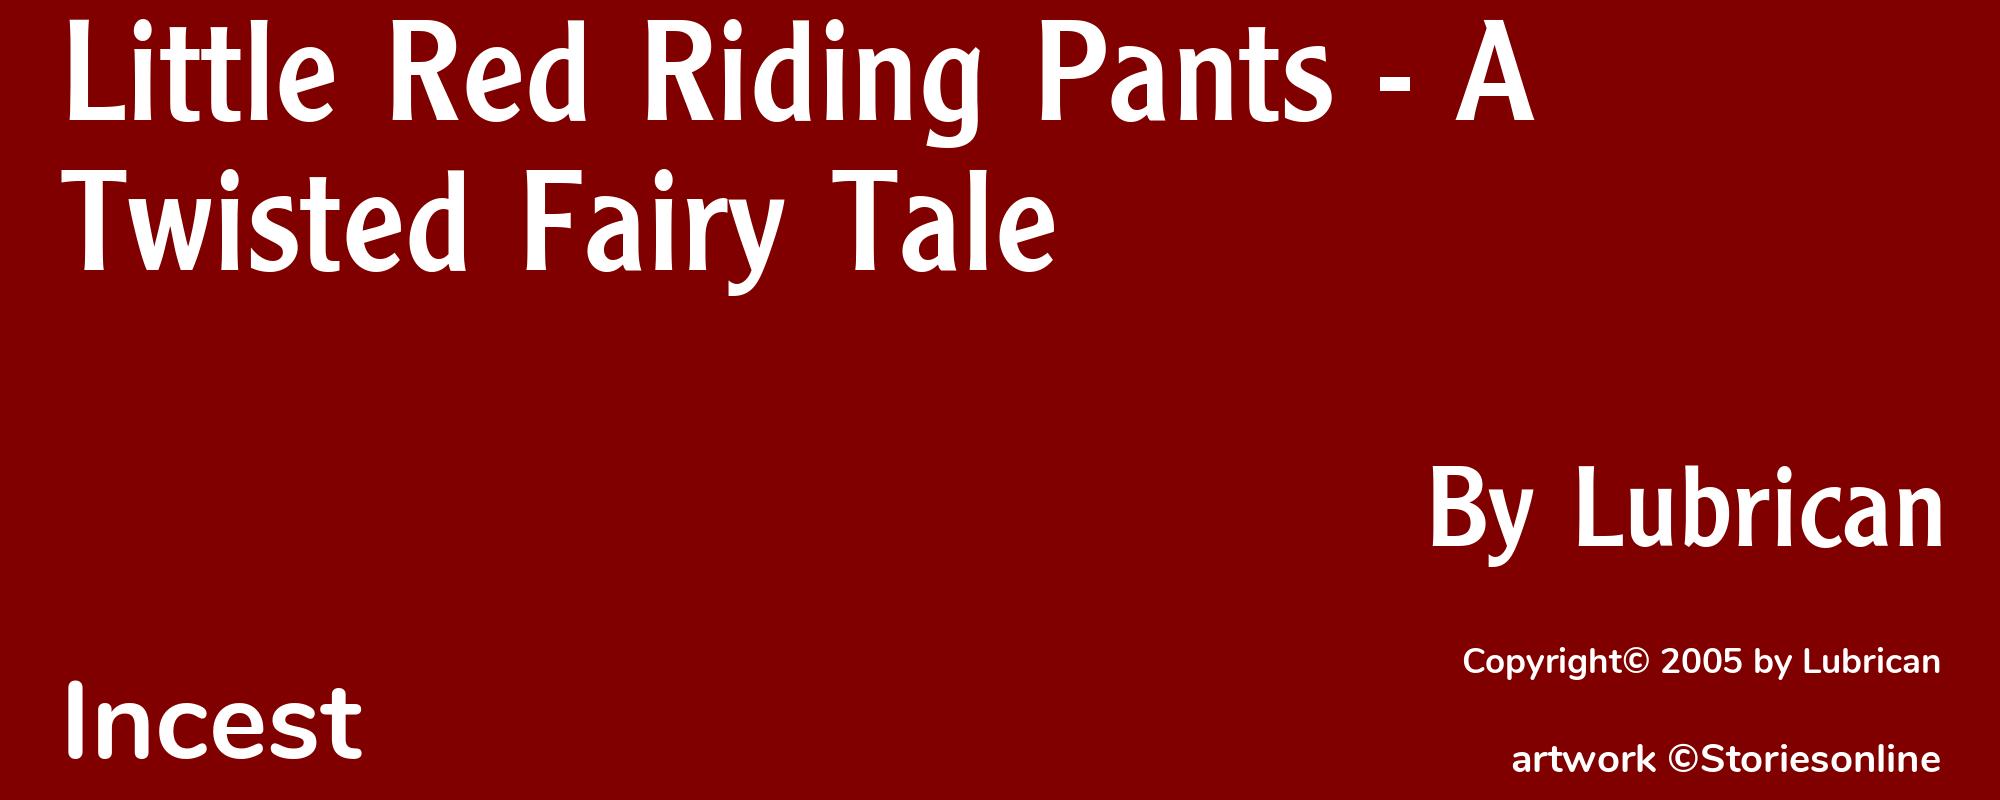 Little Red Riding Pants - A Twisted Fairy Tale - Cover